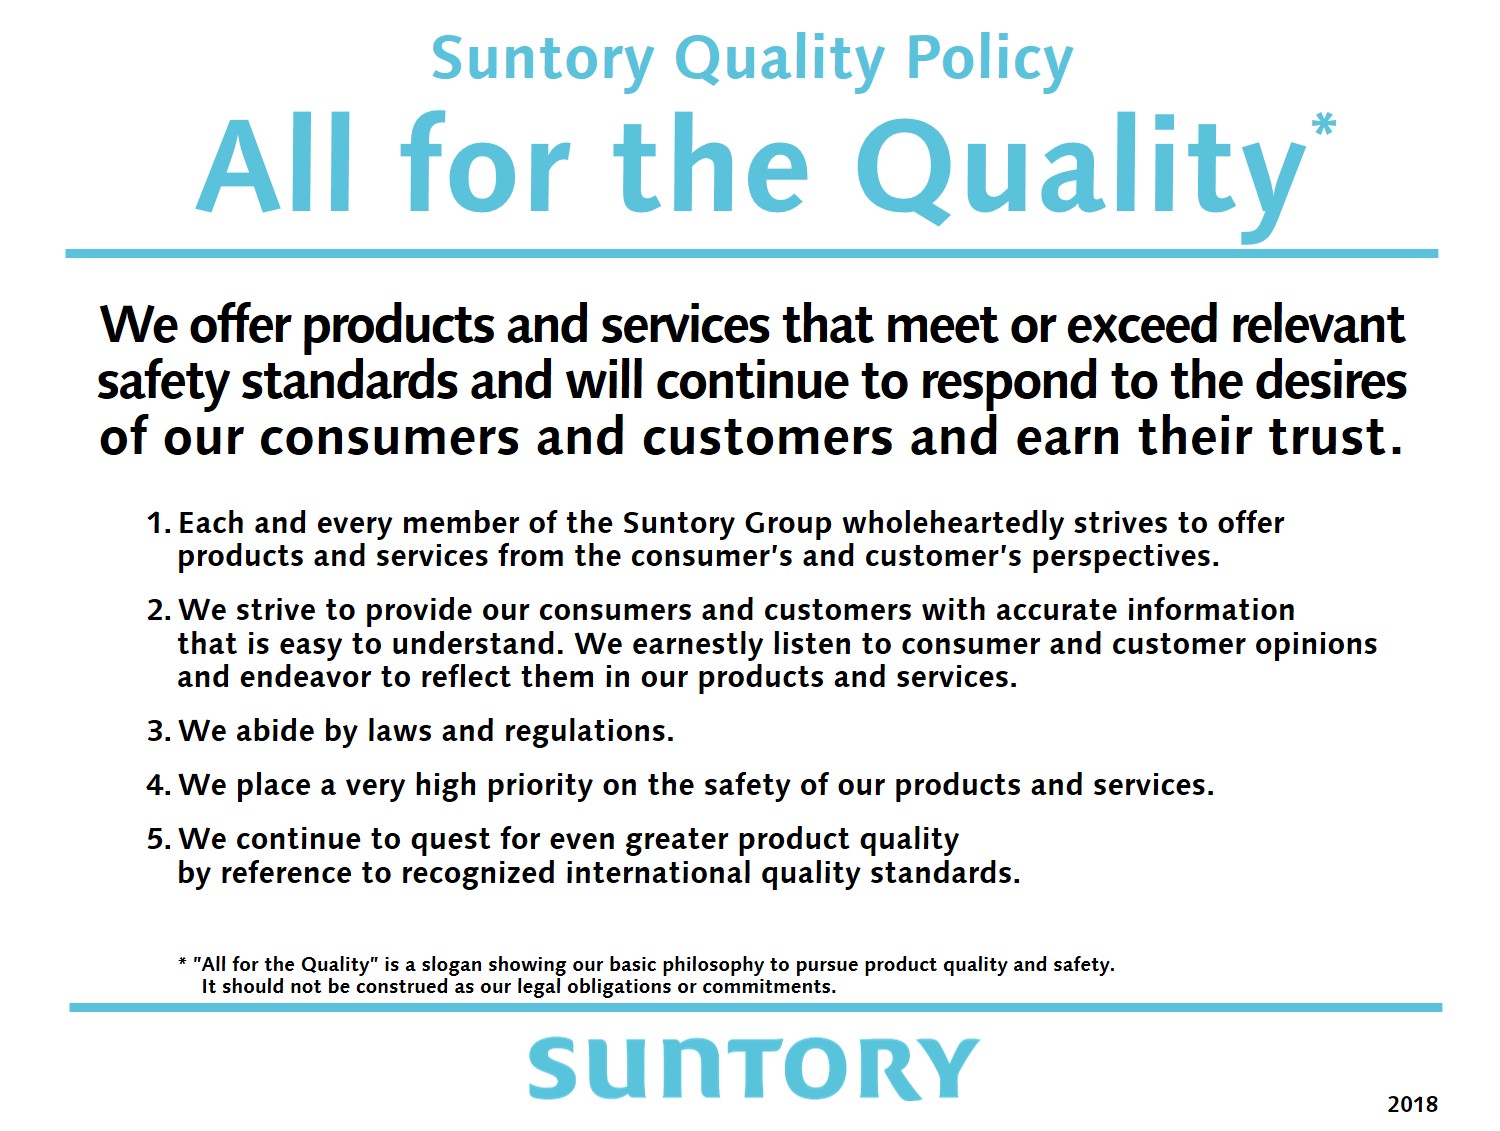 Promotion of Quality Management